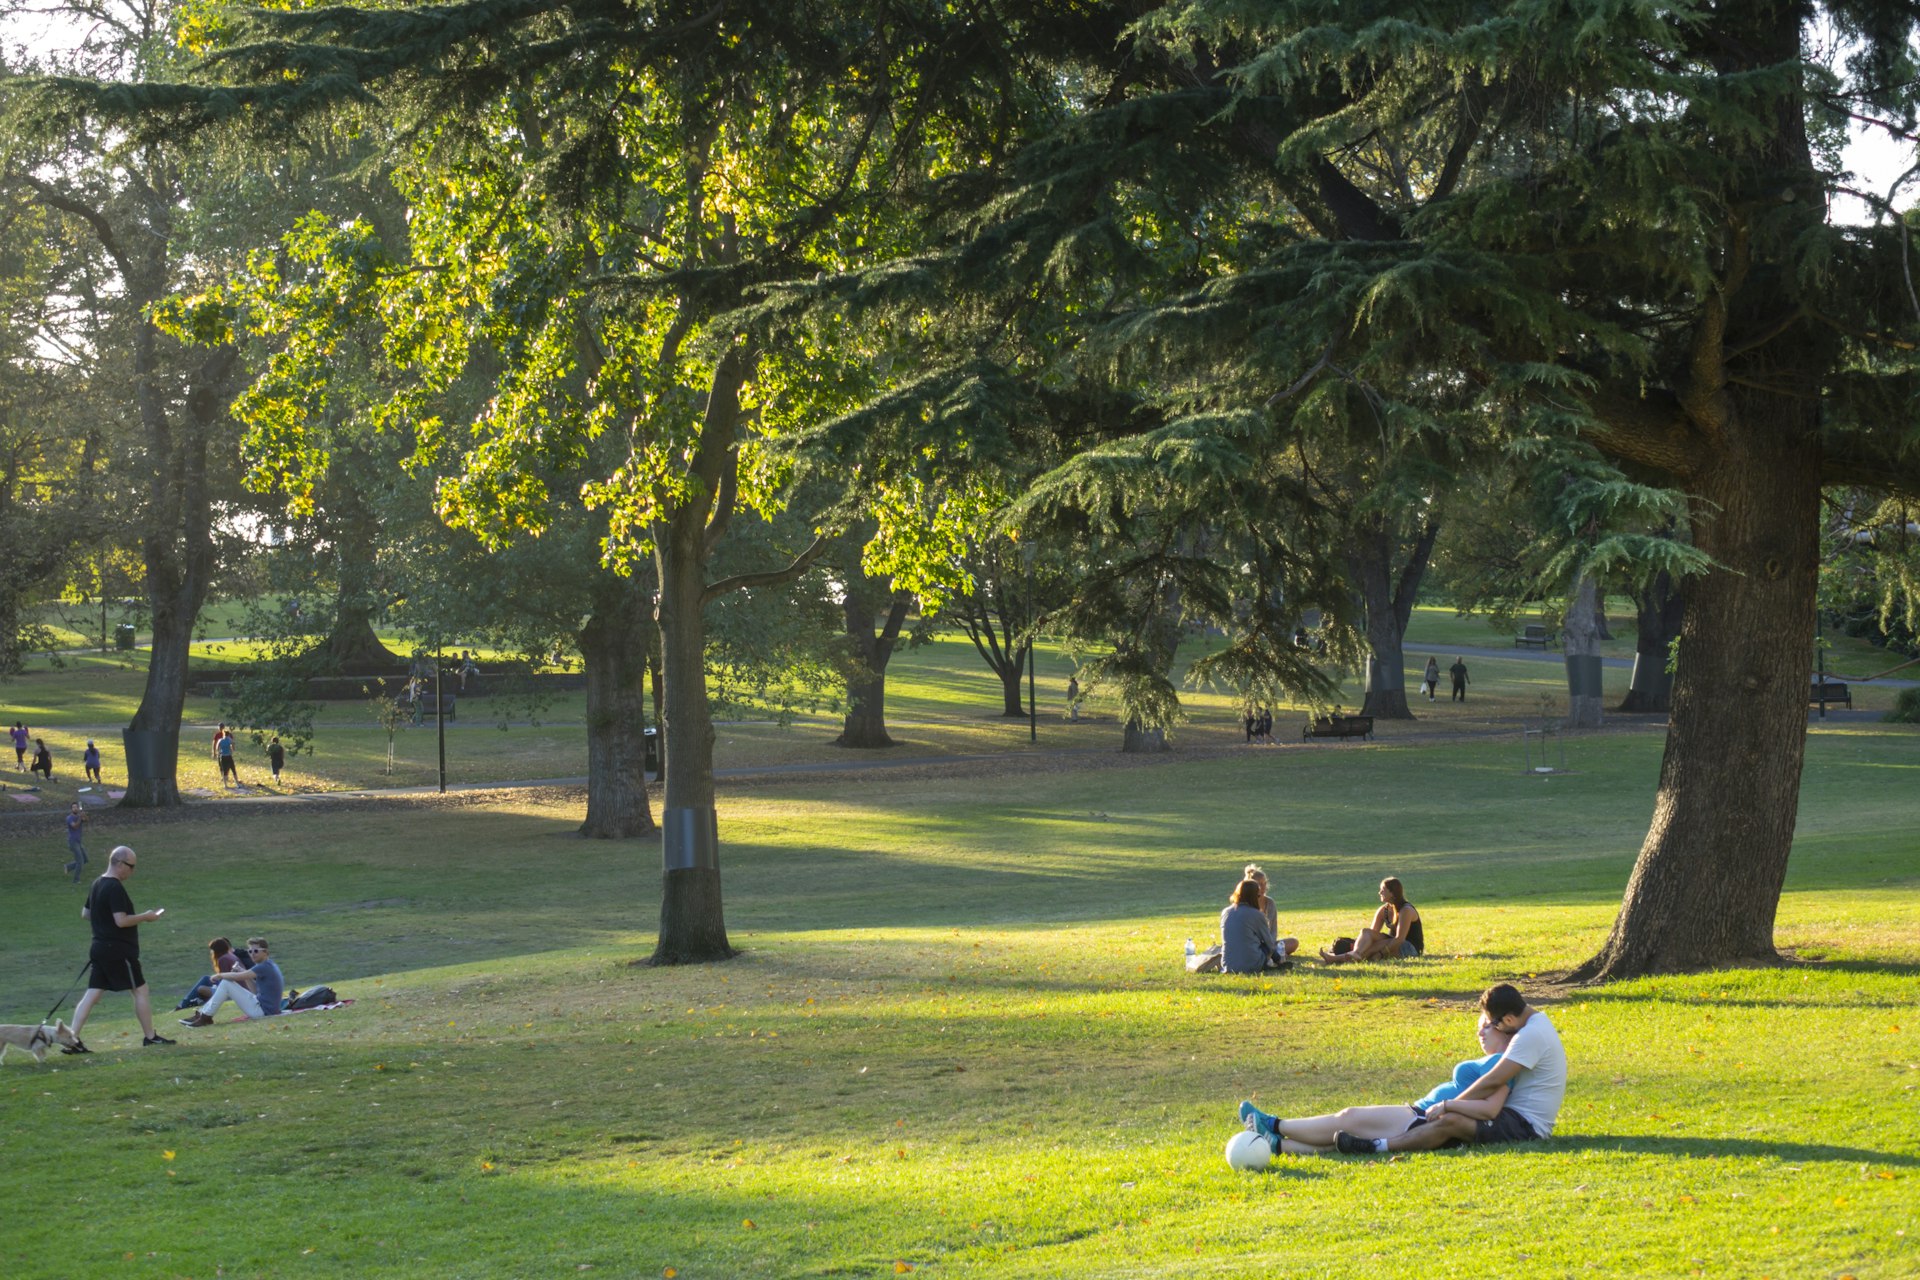 People lie on the grass under the shade of large trees in Flagstaff Gardens, Melbourne.